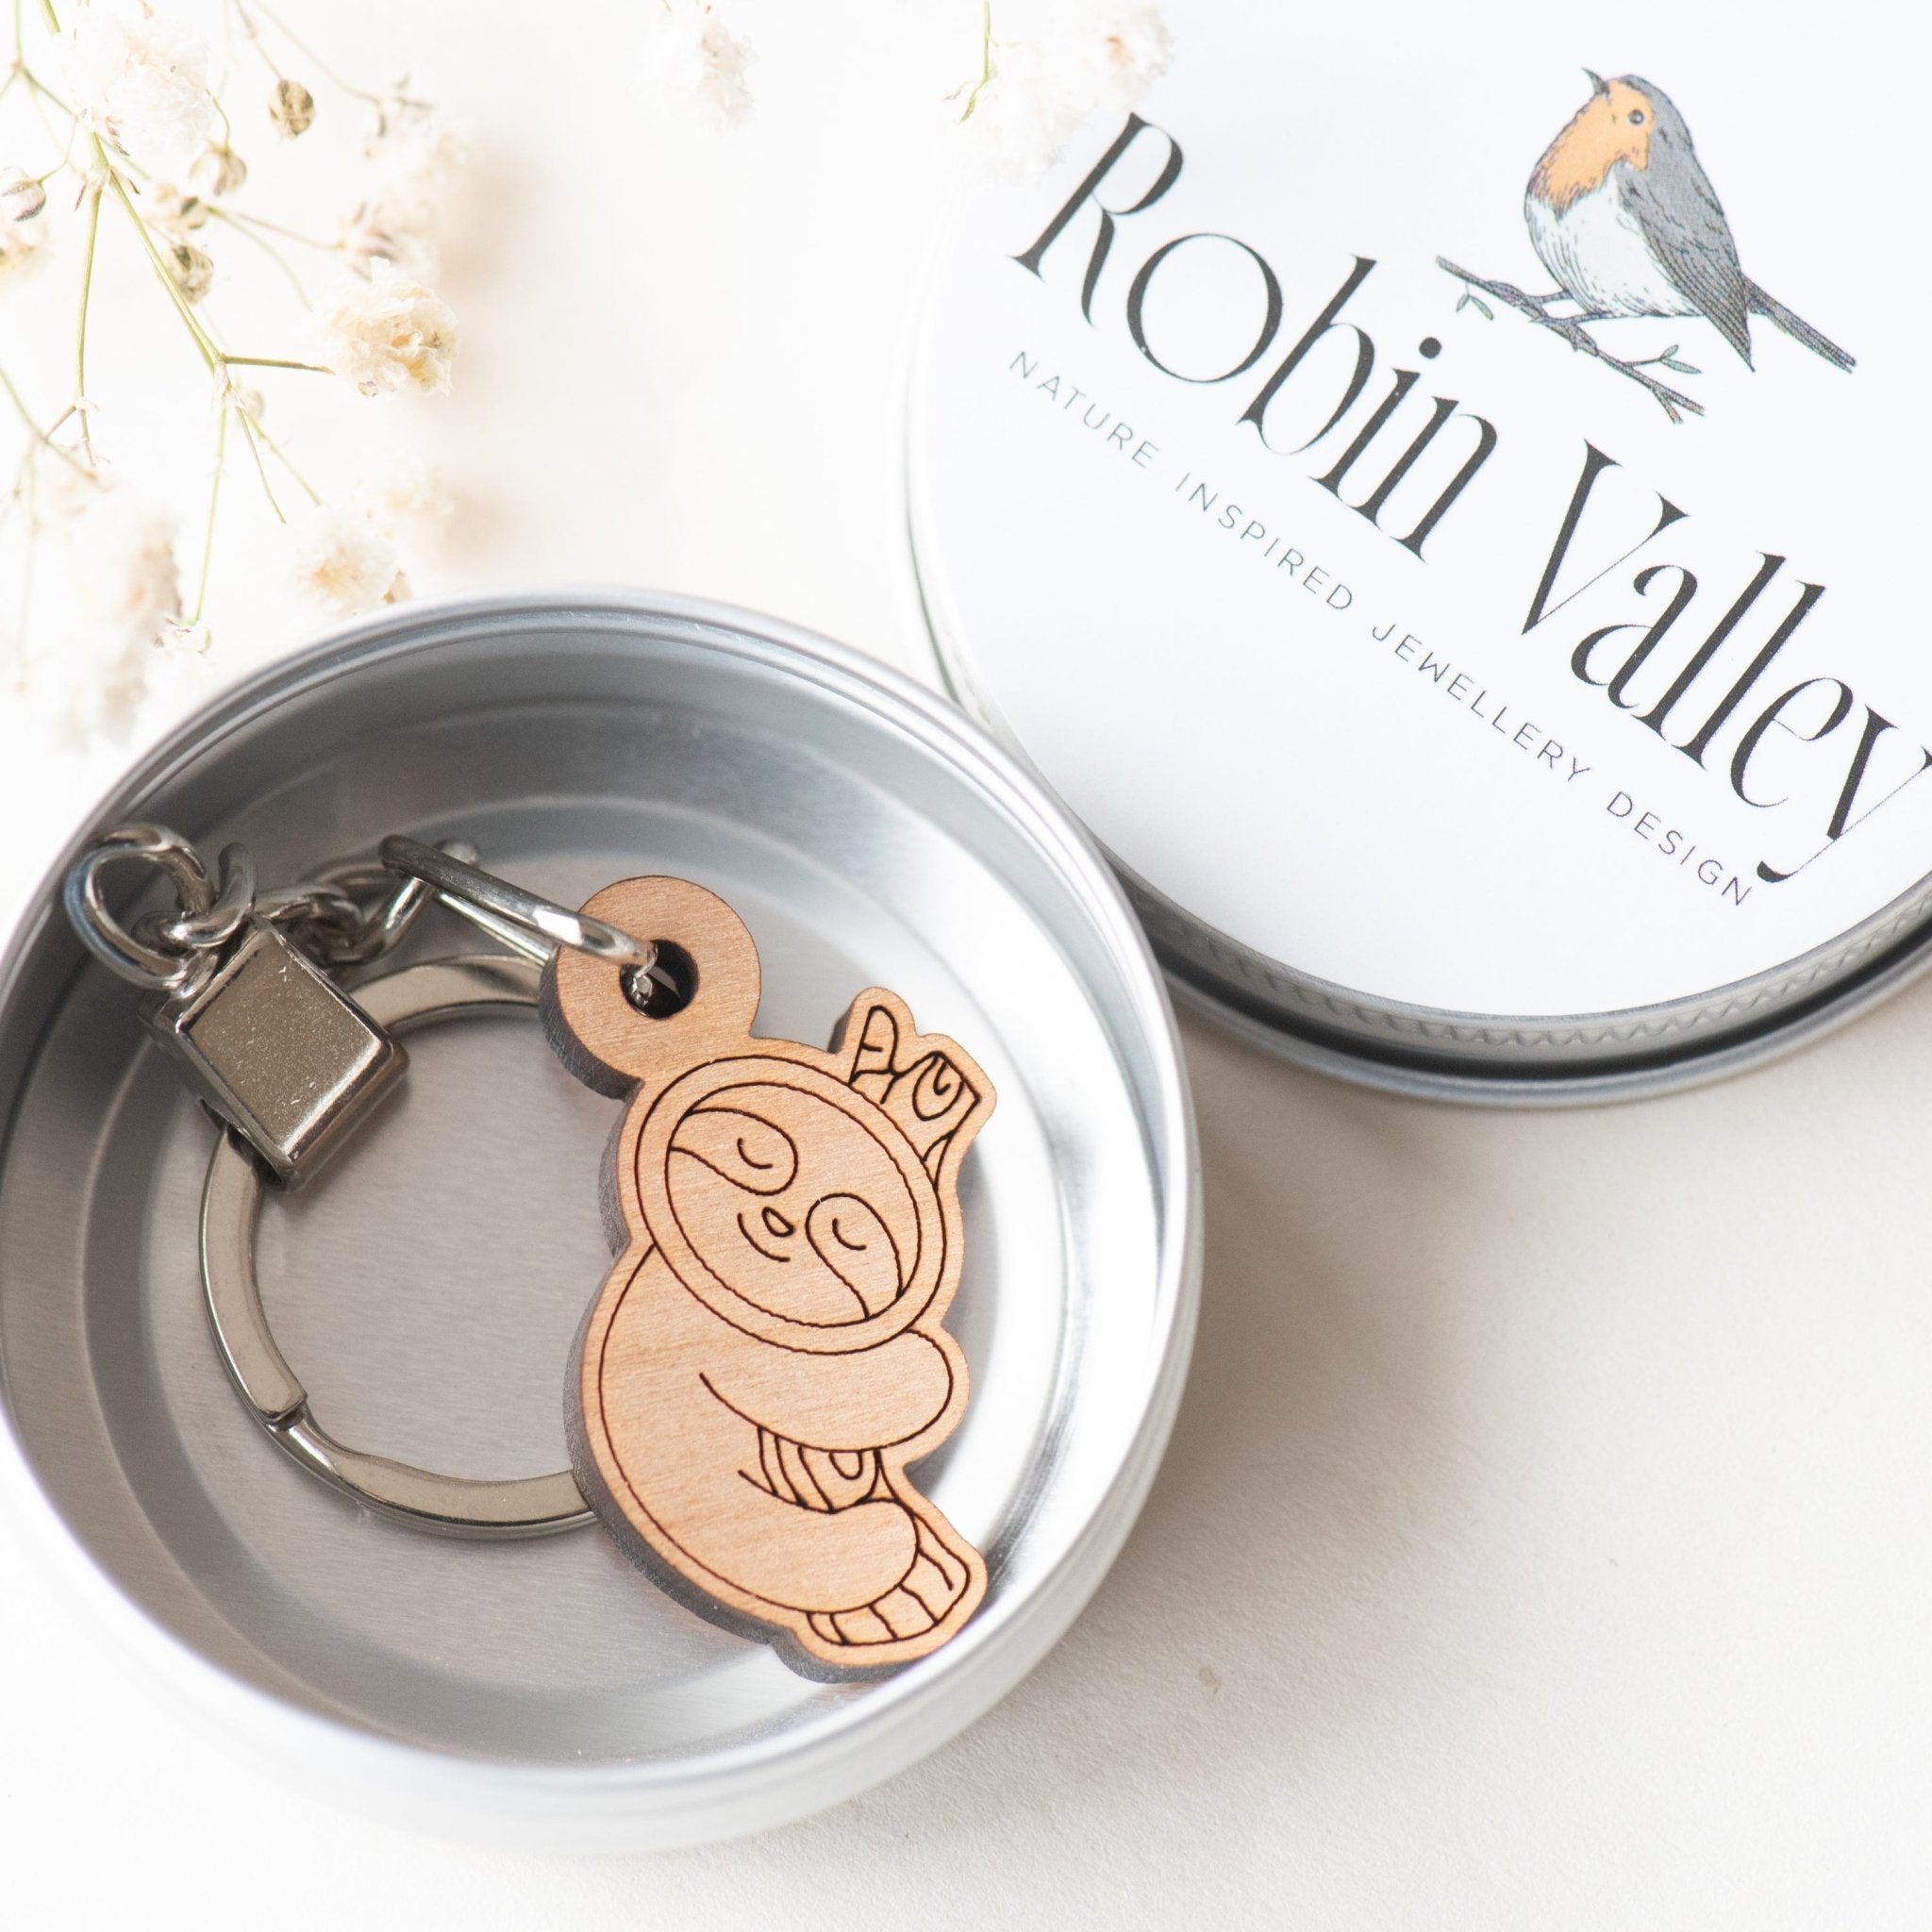 Sleeping Sloth Cherry Wood Keyring KL20011 - Robin Valley Official Store